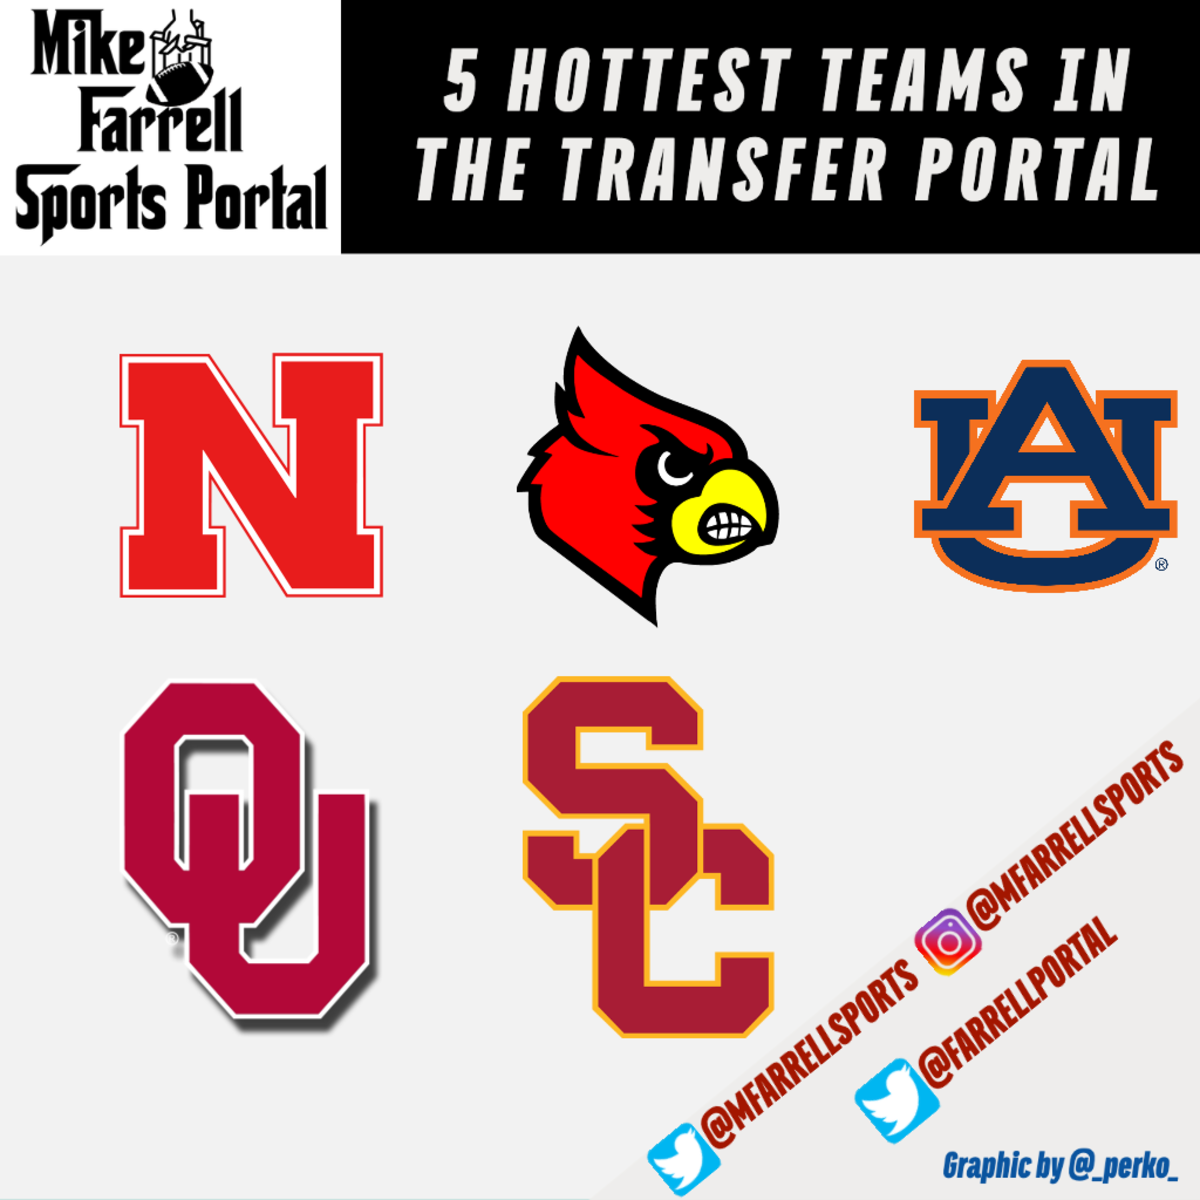 5 Hottest Teams in the Transfer Portal